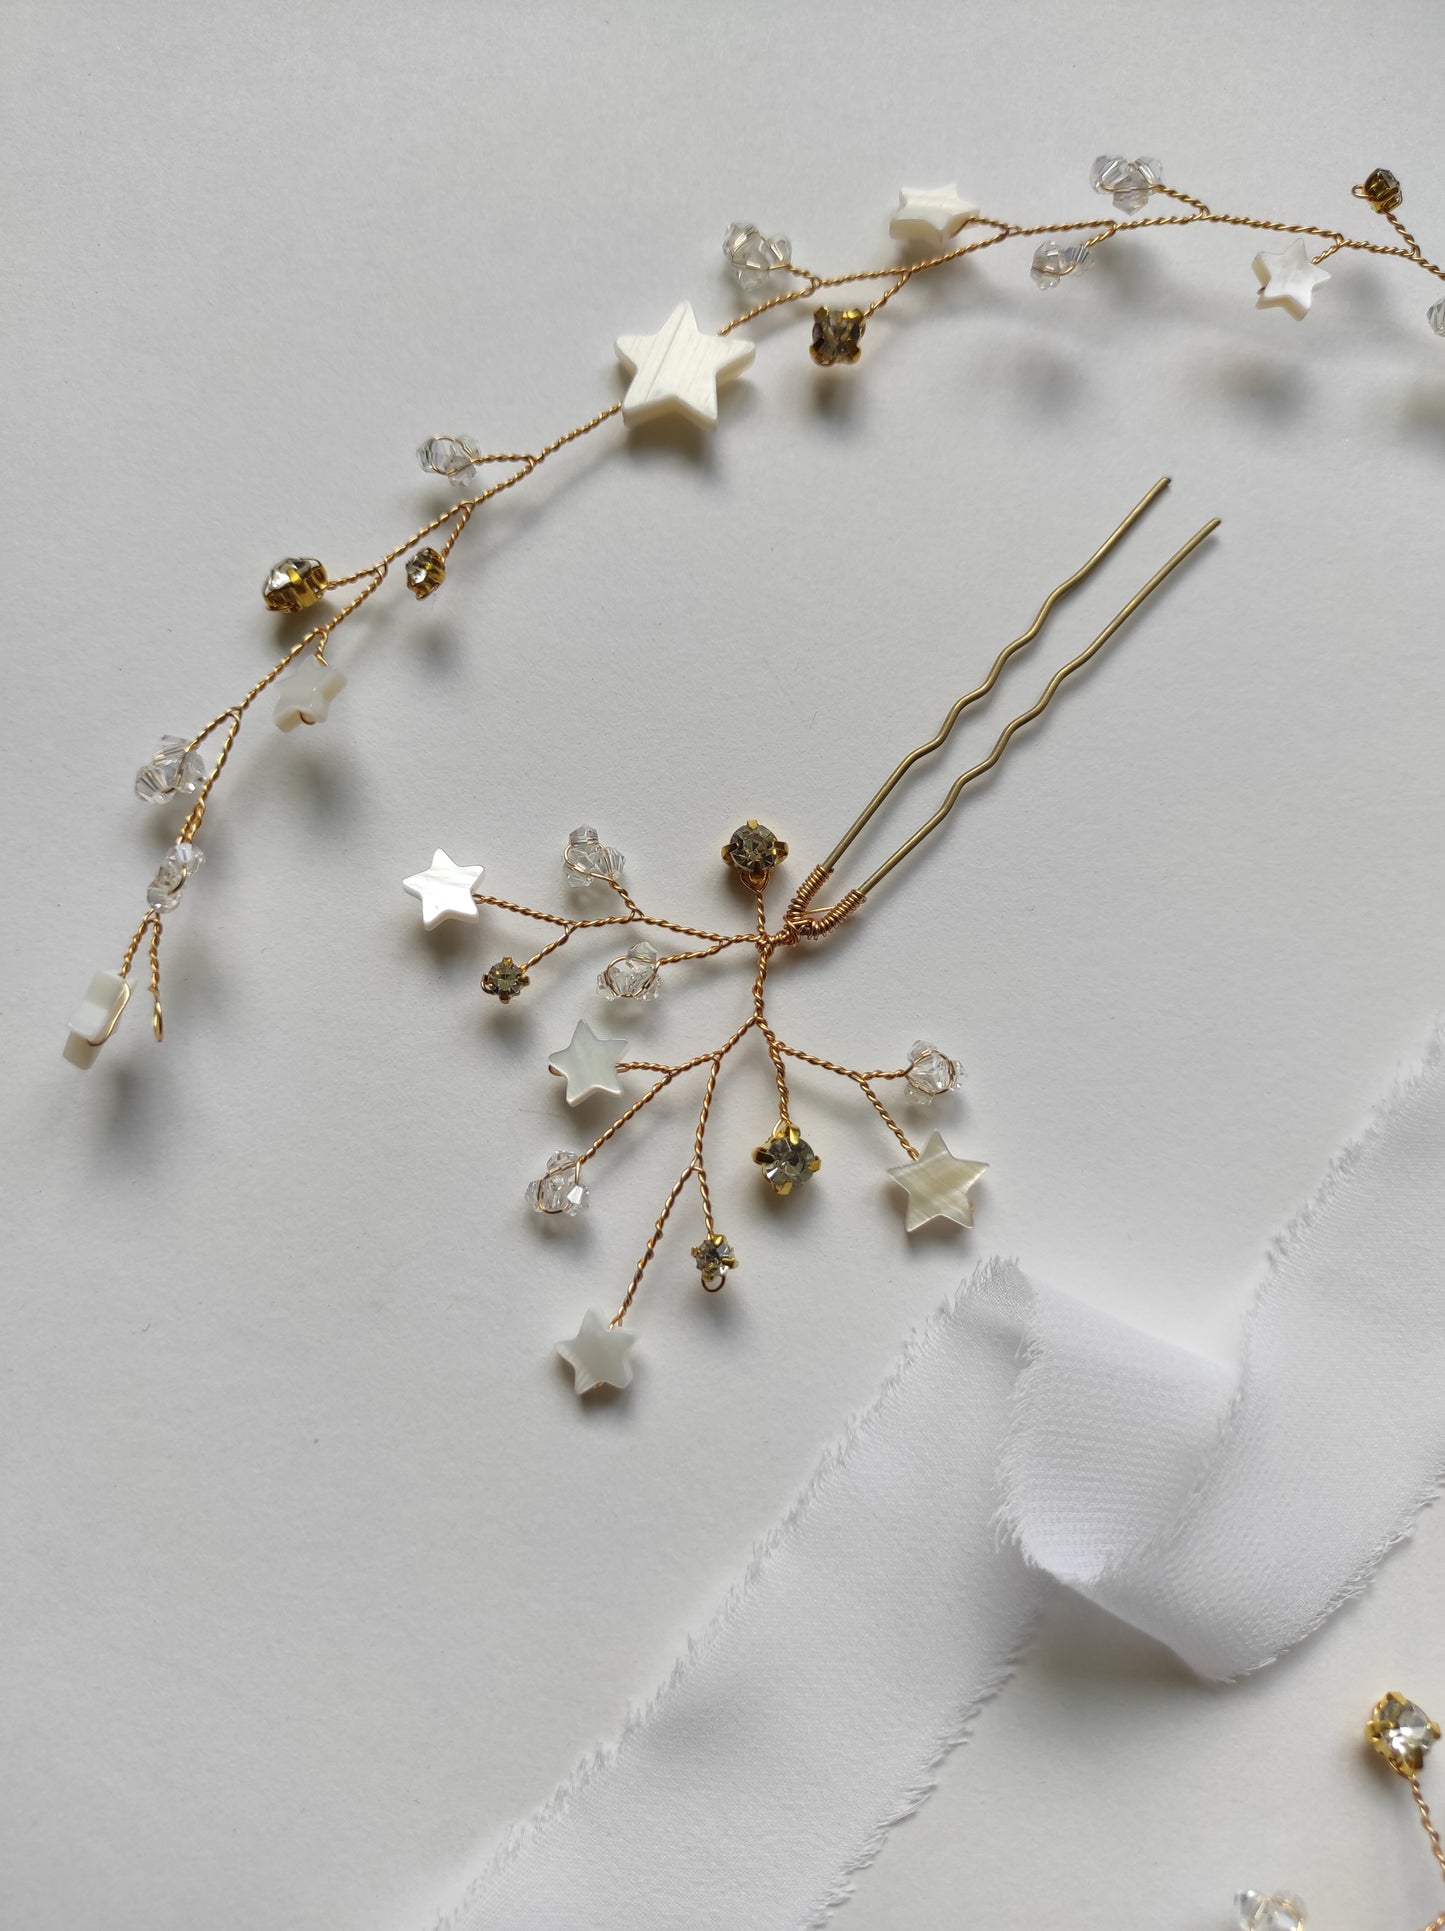 Bridal hair vine STARLEY | Bridal hair accessory with mother of pearl stars | Wedding halo